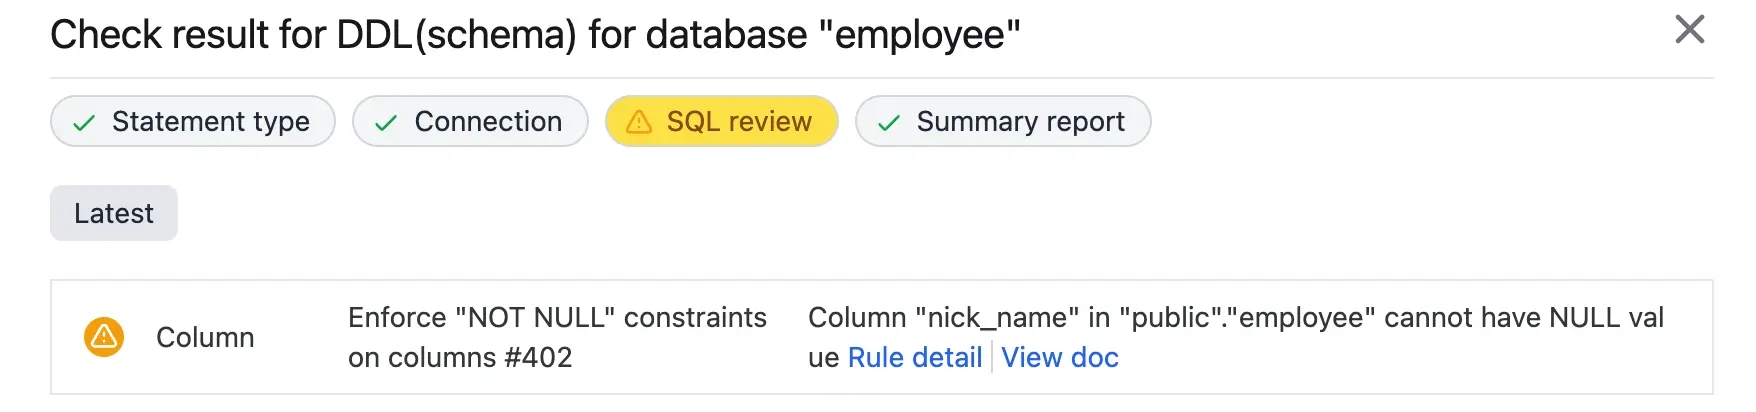 bb-issue-sql-review-not-null-warning